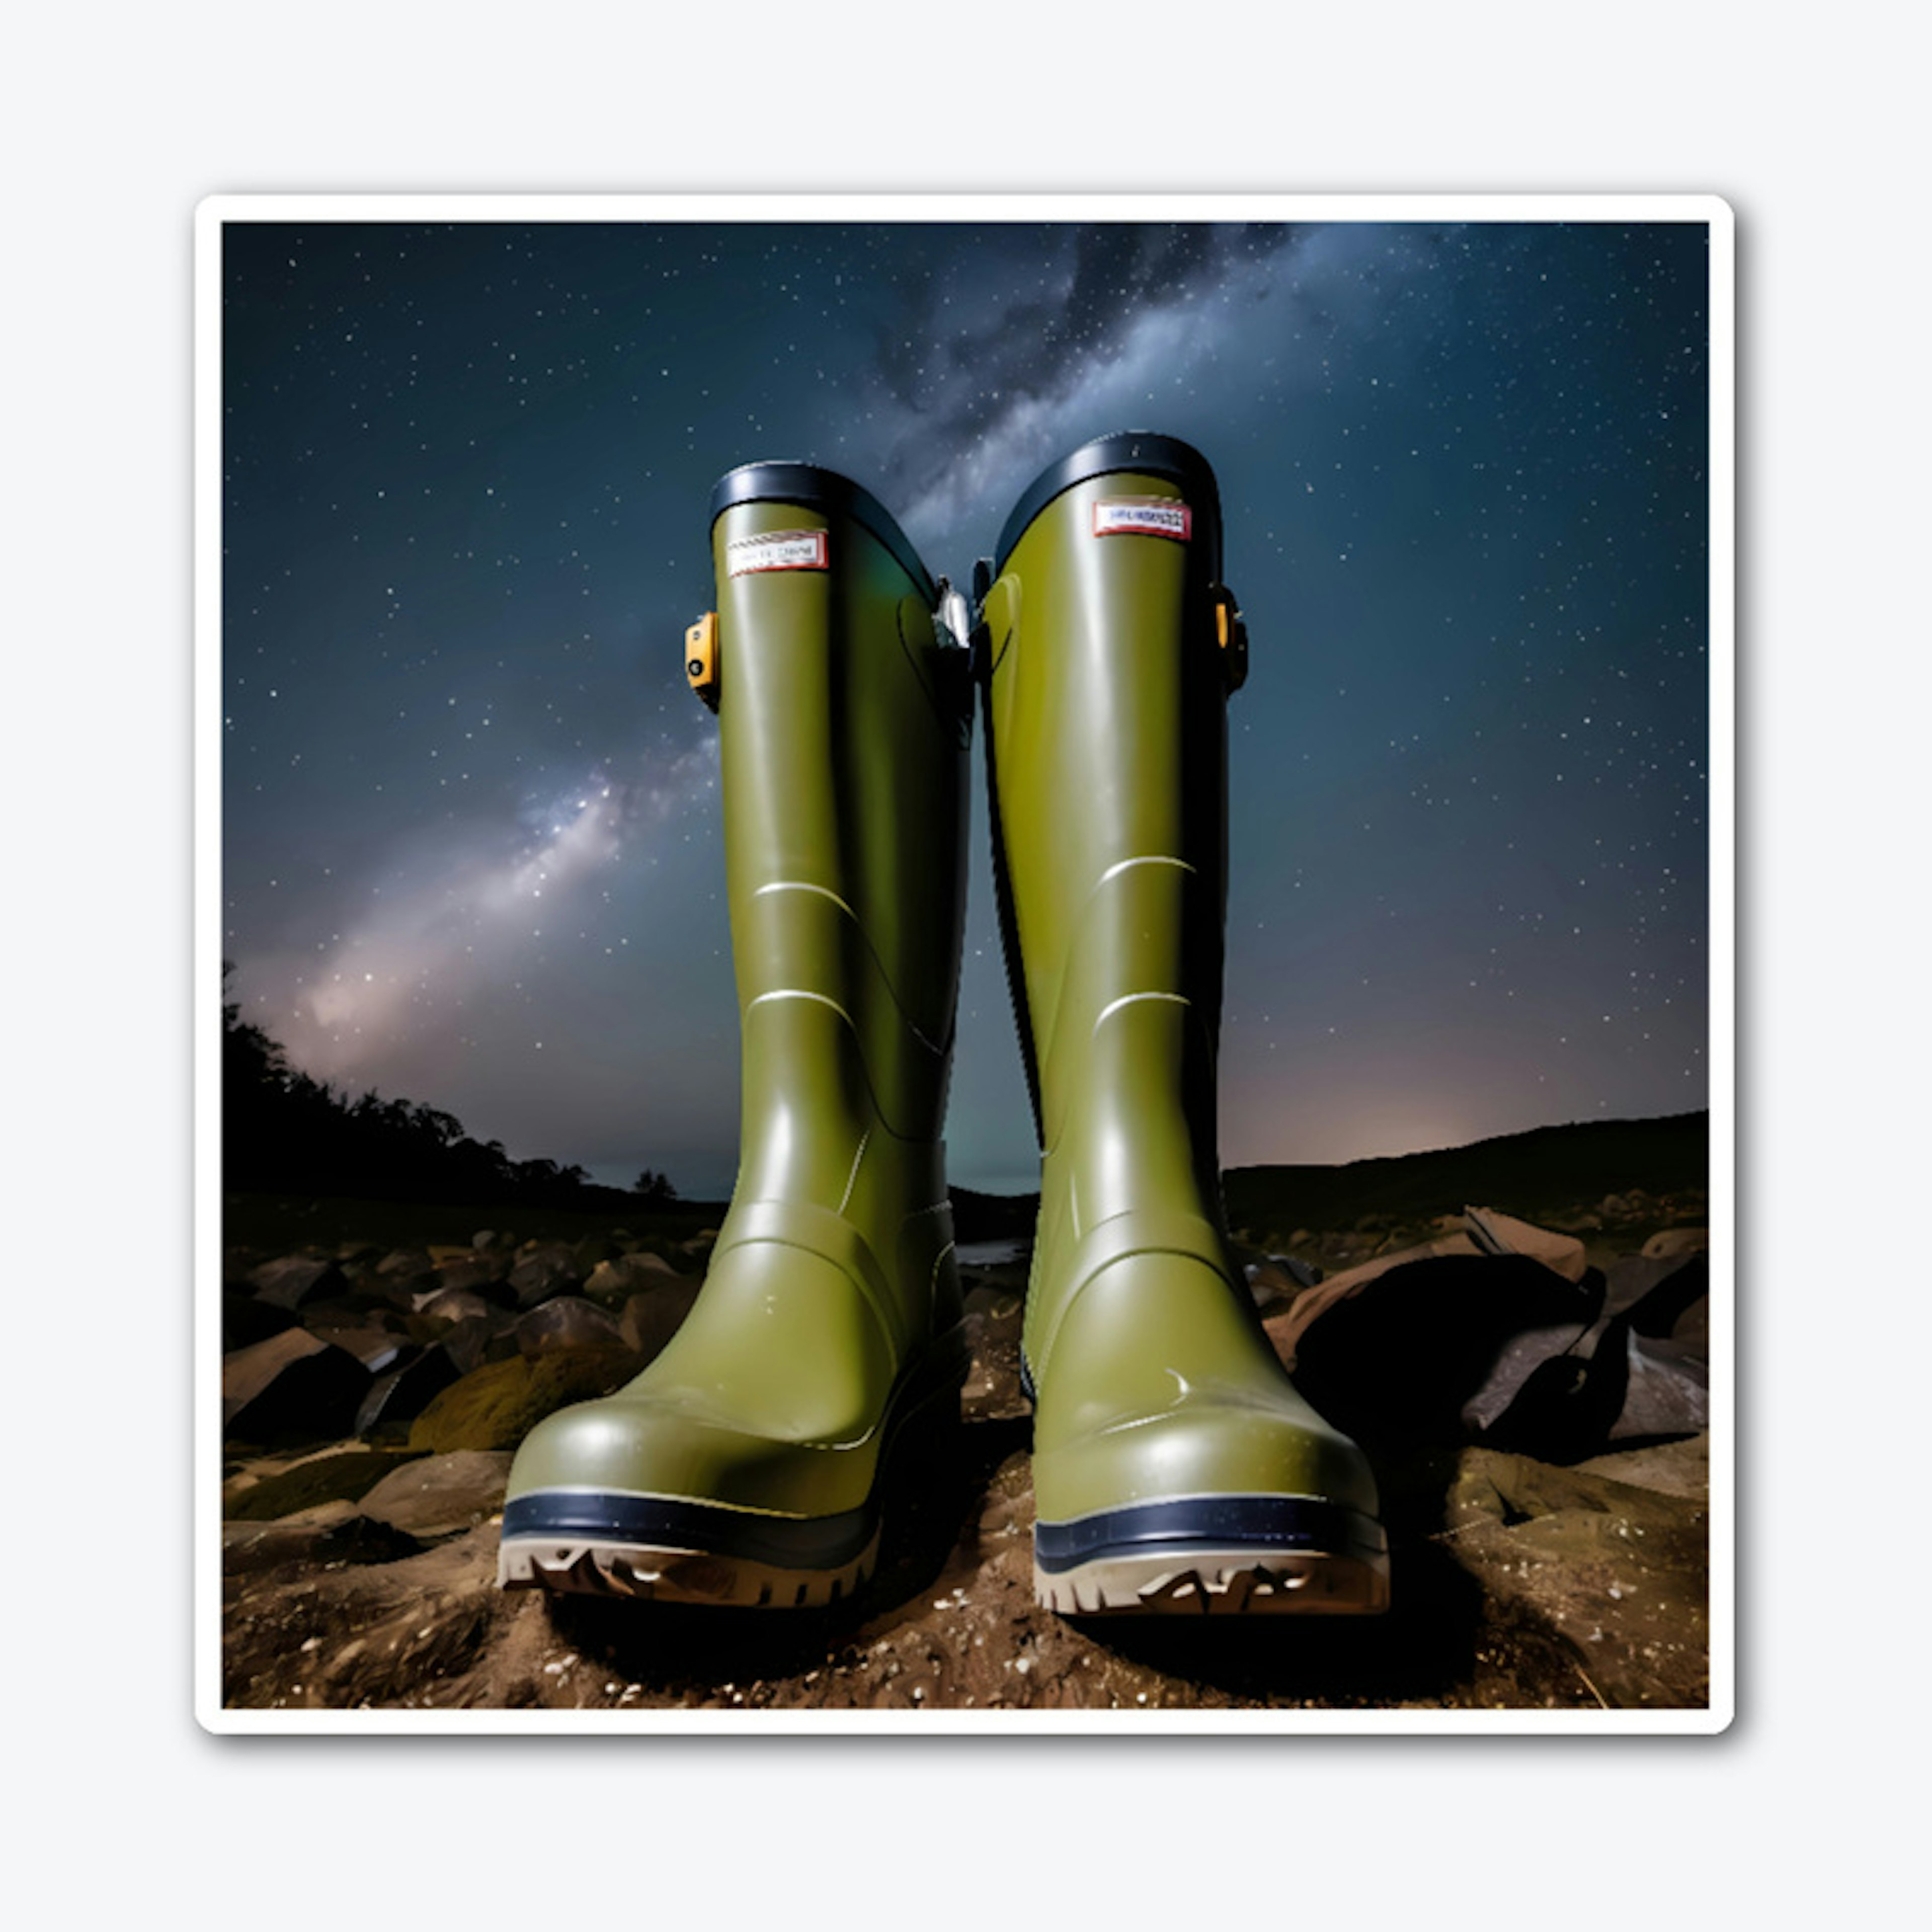 A pair of wellingtons and space